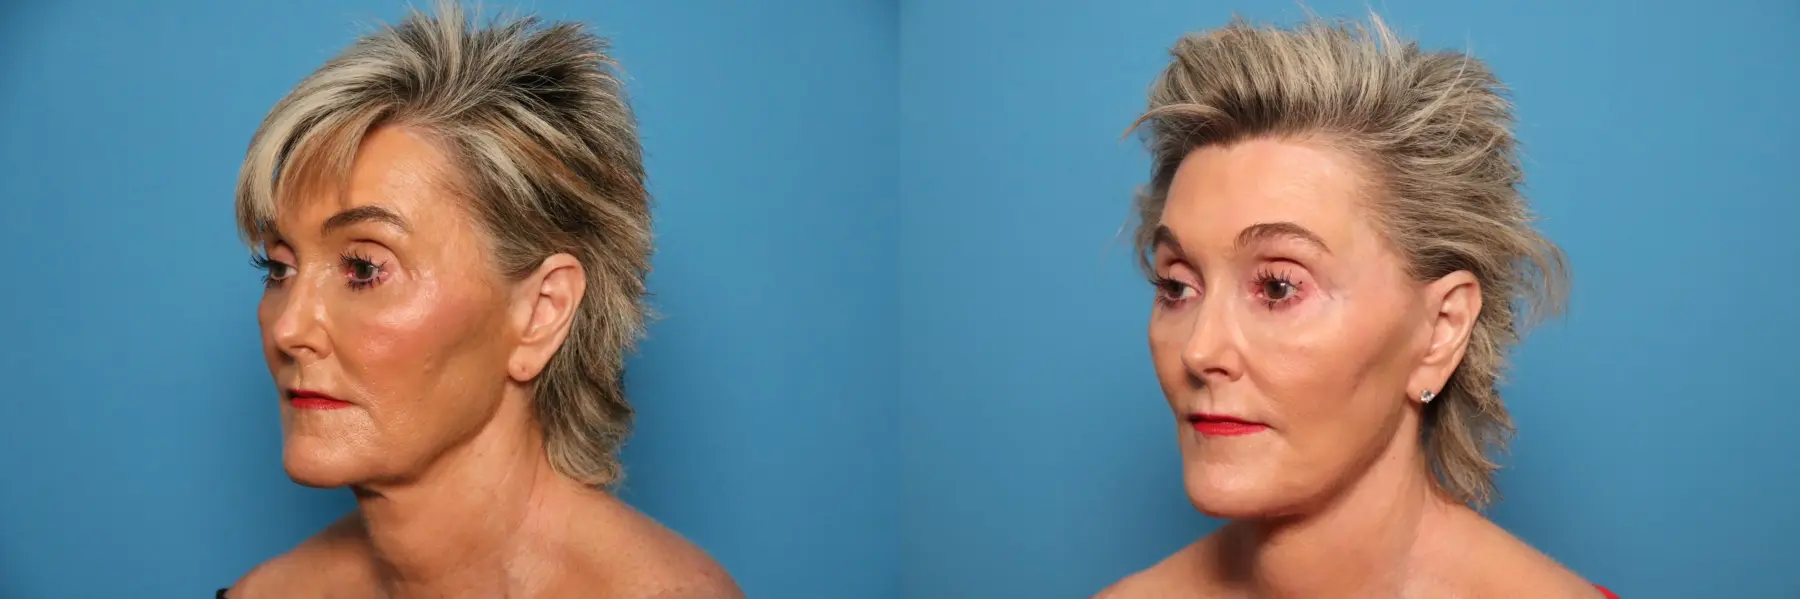 Mini Facelift: Patient 6 - Before and After 2